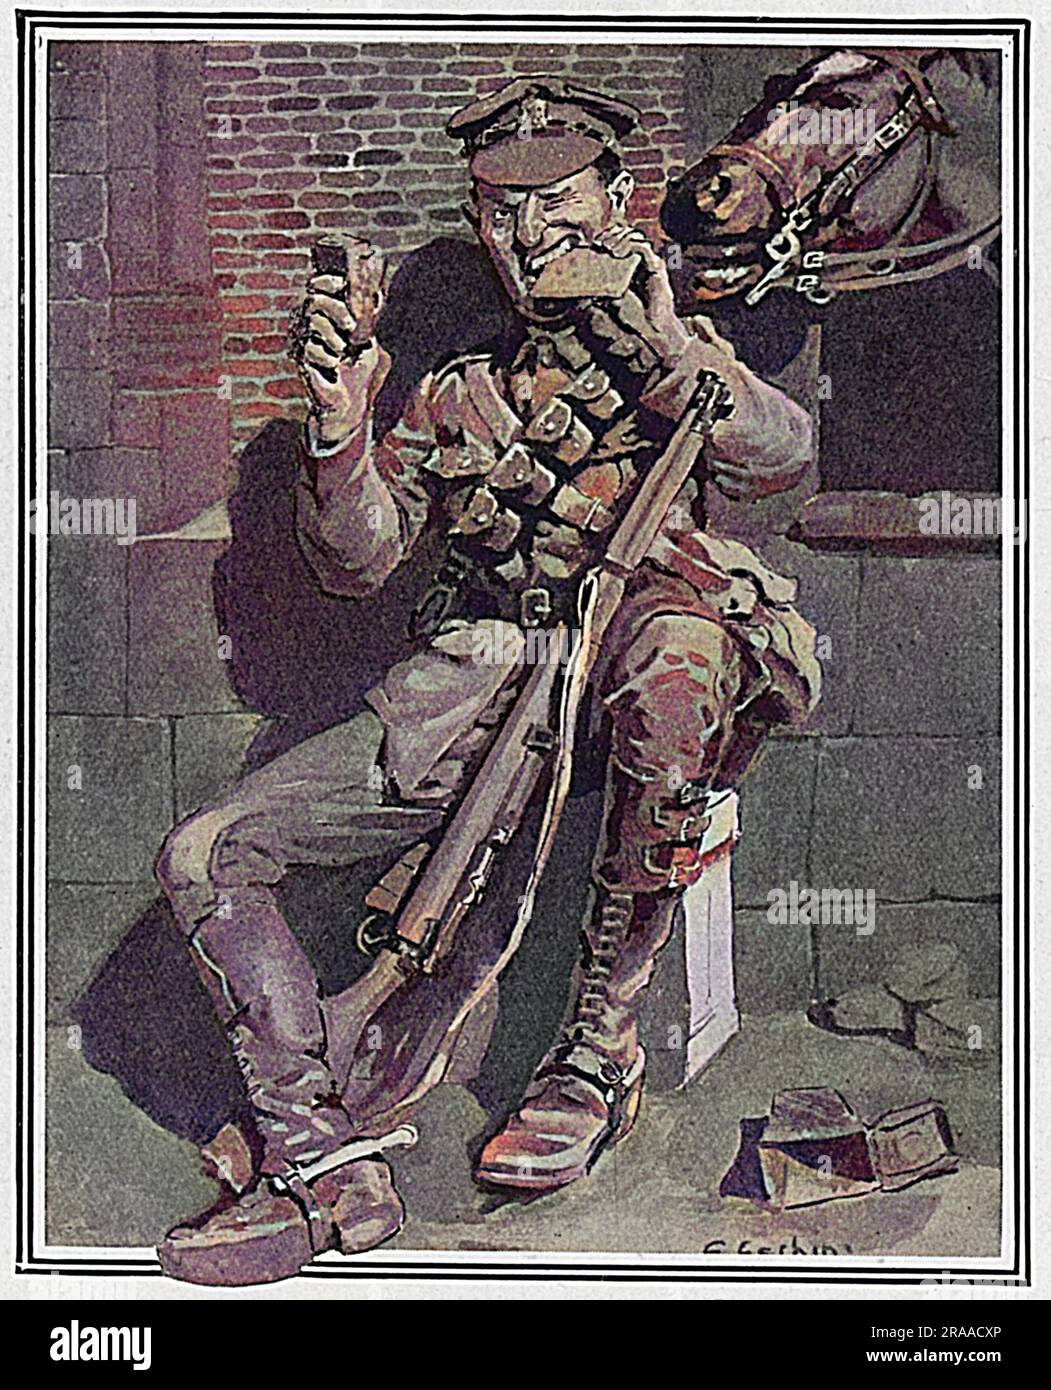 A humorous cartoon by a serving soldier, Sapper E. G. Eschini showing a British soldier gnawing at the tough and unpalatable biscuits and beef, typical rations during the First World War.     Date: 1917 Stock Photo